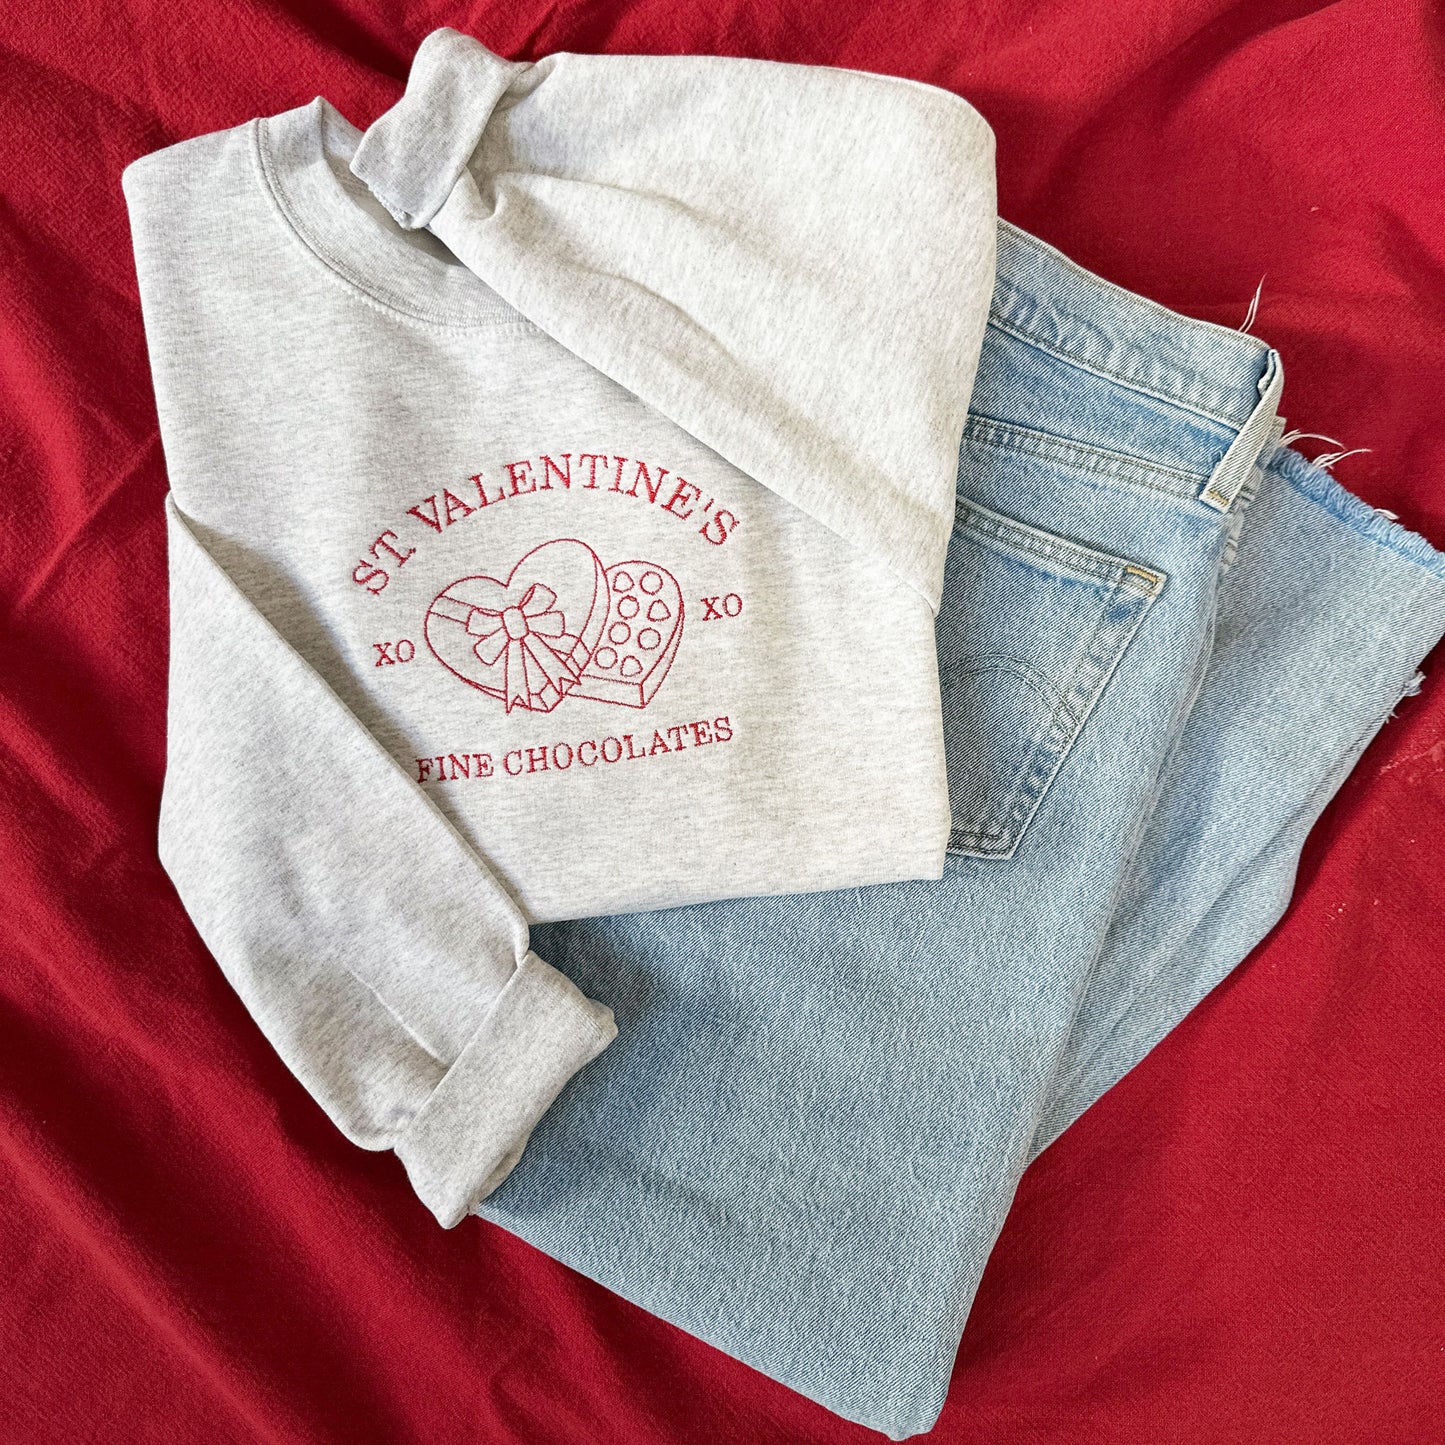 blue jeans paired with a gray crewneck sweatshirt with a red  valentine's chocolate and chocolate heart gift box embroidered on the center chest